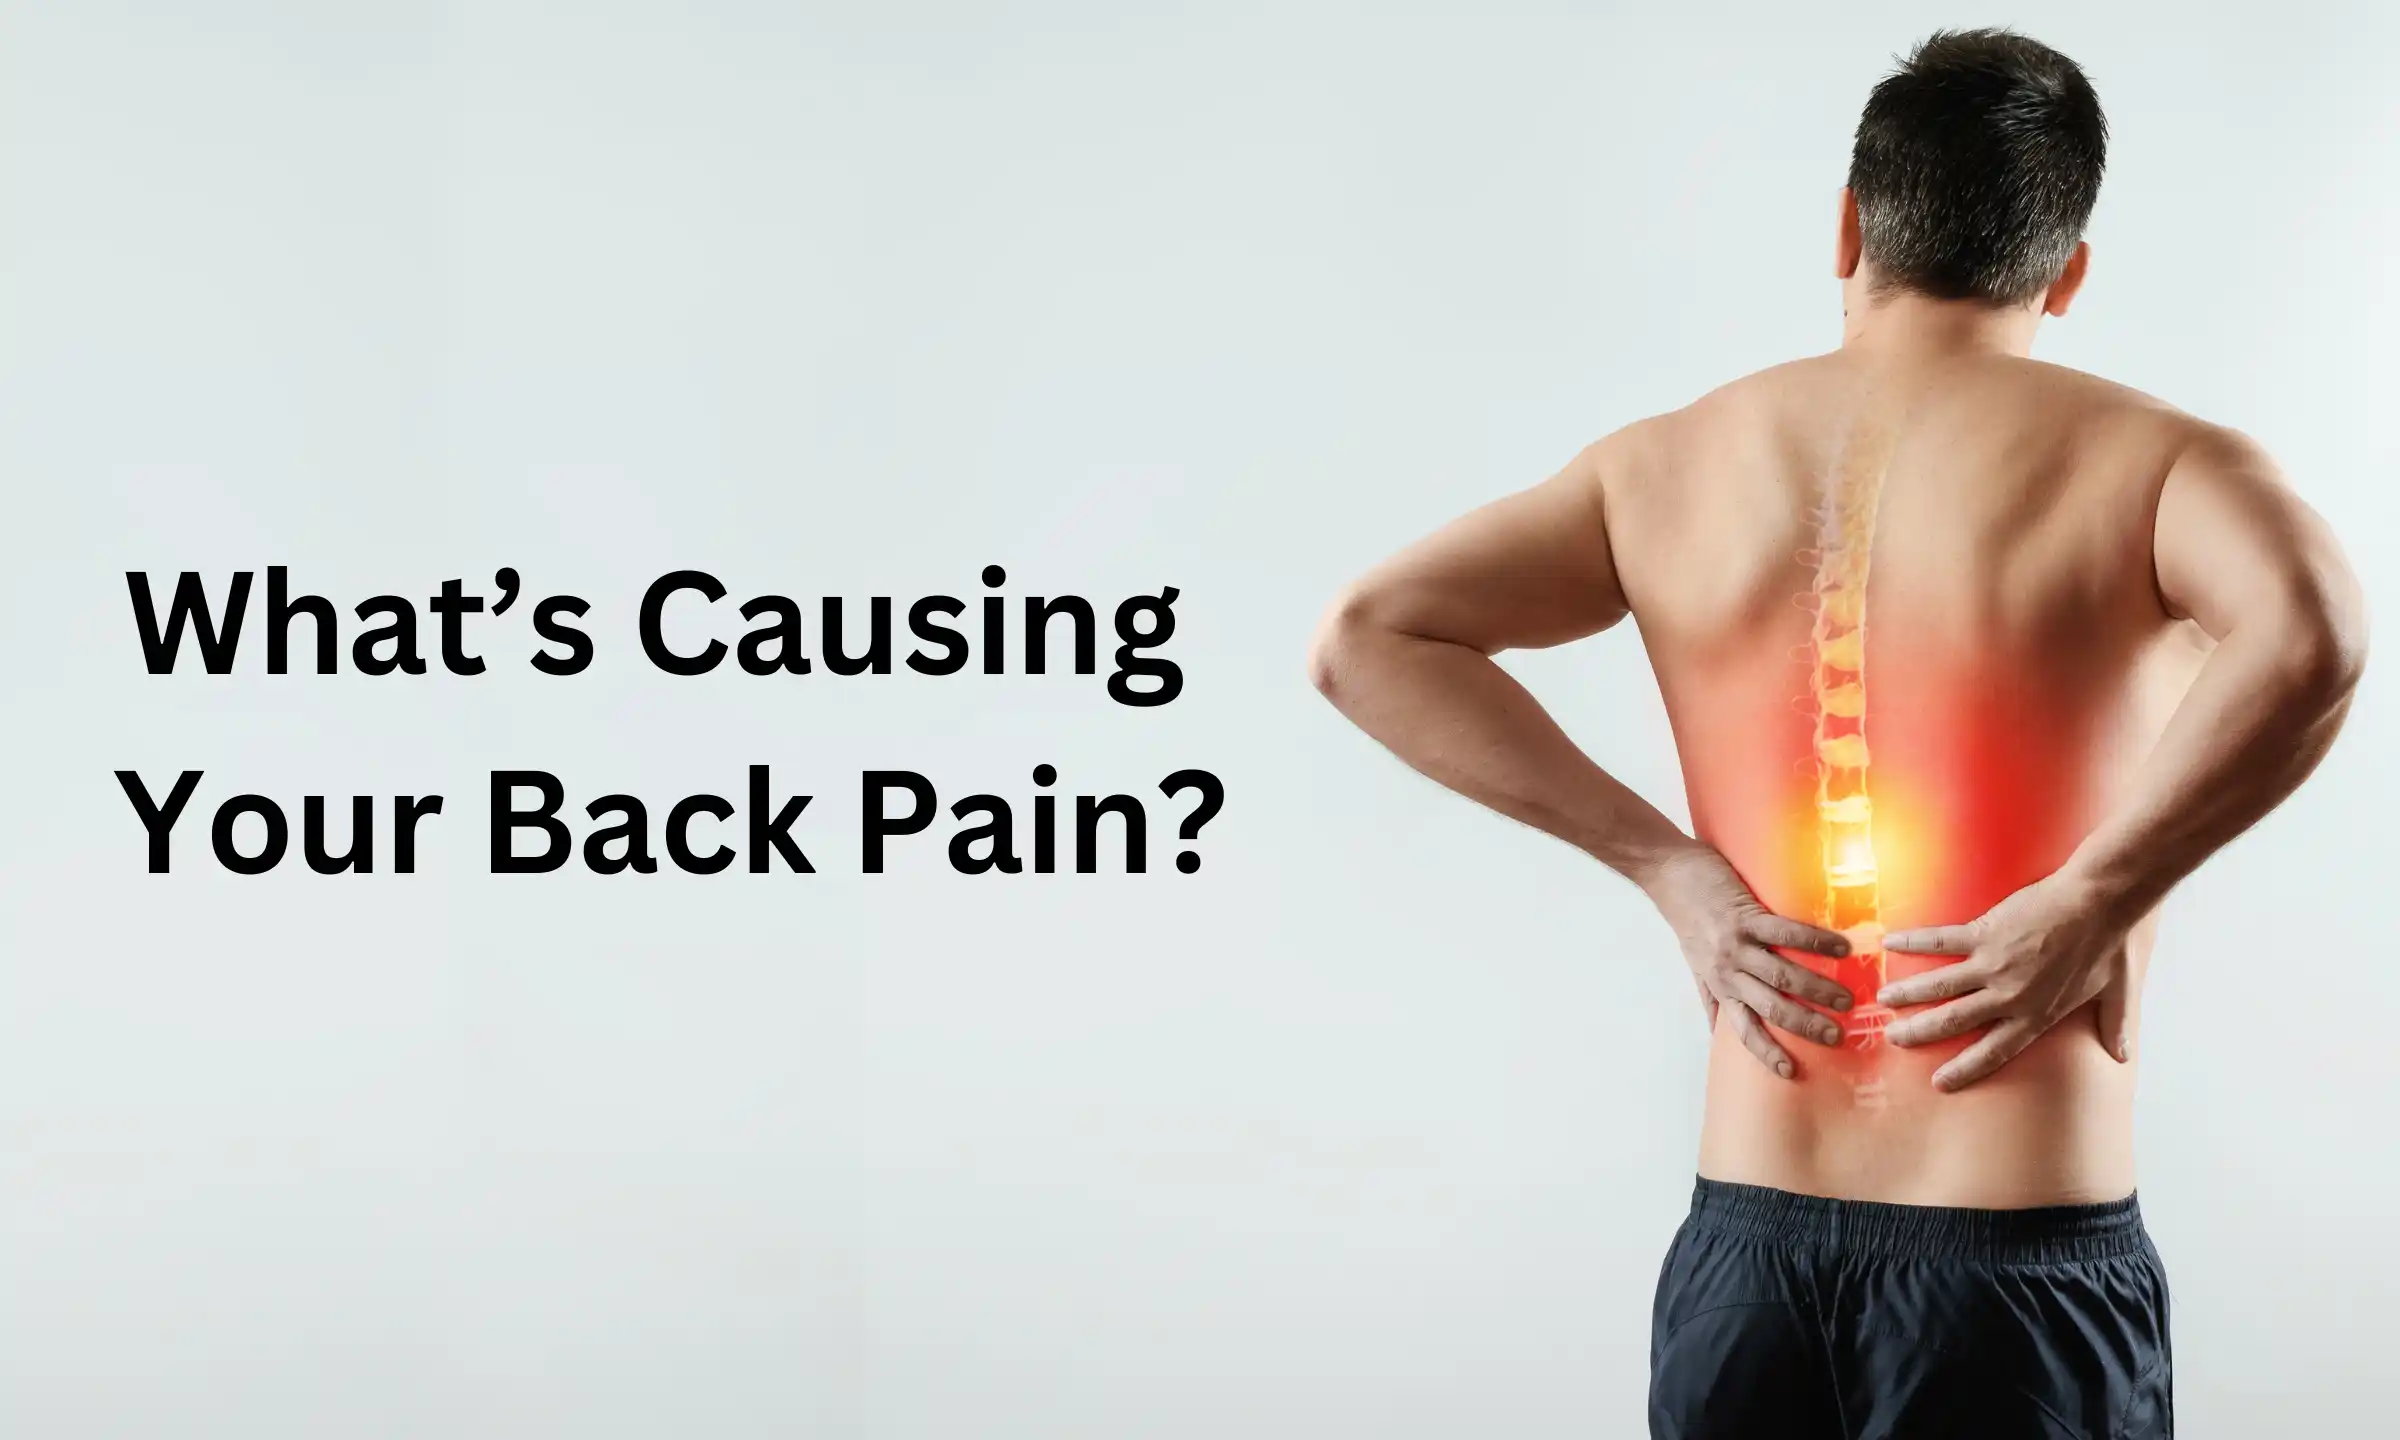 What’s Causing Your Back Pain